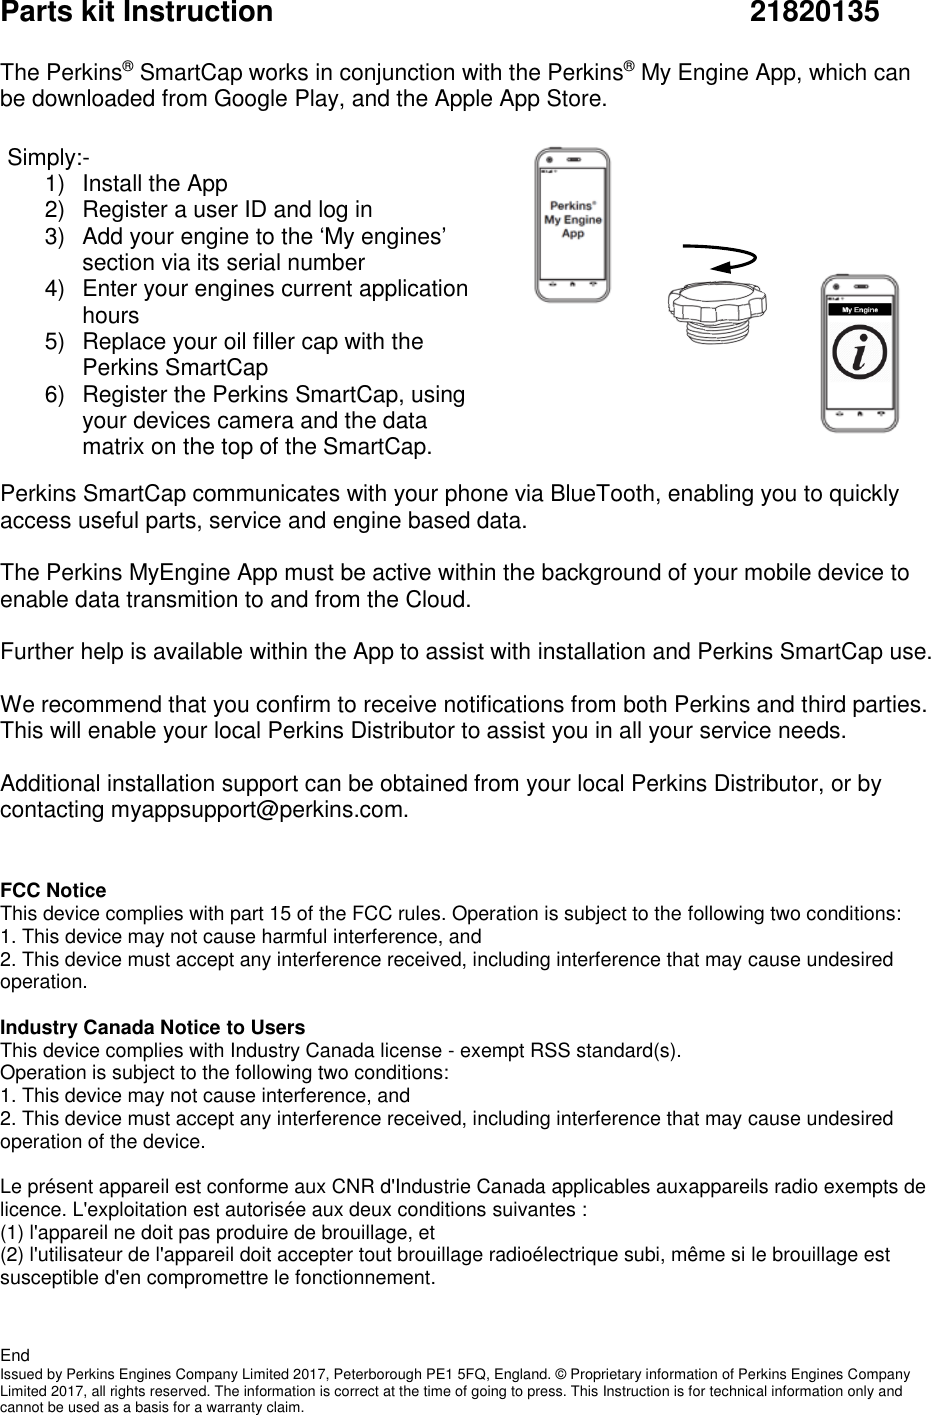 Parts kit Instruction              21820135  The Perkins® SmartCap works in conjunction with the Perkins® My Engine App, which can be downloaded from Google Play, and the Apple App Store.               Perkins SmartCap communicates with your phone via BlueTooth, enabling you to quickly access useful parts, service and engine based data.   The Perkins MyEngine App must be active within the background of your mobile device to enable data transmition to and from the Cloud.   Further help is available within the App to assist with installation and Perkins SmartCap use.  We recommend that you confirm to receive notifications from both Perkins and third parties. This will enable your local Perkins Distributor to assist you in all your service needs.     Additional installation support can be obtained from your local Perkins Distributor, or by contacting myappsupport@perkins.com.   FCC Notice This device complies with part 15 of the FCC rules. Operation is subject to the following two conditions: 1. This device may not cause harmful interference, and 2. This device must accept any interference received, including interference that may cause undesired operation.  Industry Canada Notice to Users This device complies with Industry Canada license - exempt RSS standard(s). Operation is subject to the following two conditions: 1. This device may not cause interference, and 2. This device must accept any interference received, including interference that may cause undesired operation of the device.  Le présent appareil est conforme aux CNR d&apos;Industrie Canada applicables auxappareils radio exempts de licence. L&apos;exploitation est autorisée aux deux conditions suivantes : (1) l&apos;appareil ne doit pas produire de brouillage, et (2) l&apos;utilisateur de l&apos;appareil doit accepter tout brouillage radioélectrique subi, même si le brouillage est susceptible d&apos;en compromettre le fonctionnement.   End Issued by Perkins Engines Company Limited 2017, Peterborough PE1 5FQ, England. © Proprietary information of Perkins Engines Company Limited 2017, all rights reserved. The information is correct at the time of going to press. This Instruction is for technical information only and cannot be used as a basis for a warranty claim. Simply:-  1)  Install the App  2)  Register a user ID and log in 3)  Add your engine to the ‘My engines’ section via its serial number  4)  Enter your engines current application hours  5)  Replace your oil filler cap with the Perkins SmartCap   6)  Register the Perkins SmartCap, using your devices camera and the data matrix on the top of the SmartCap. 